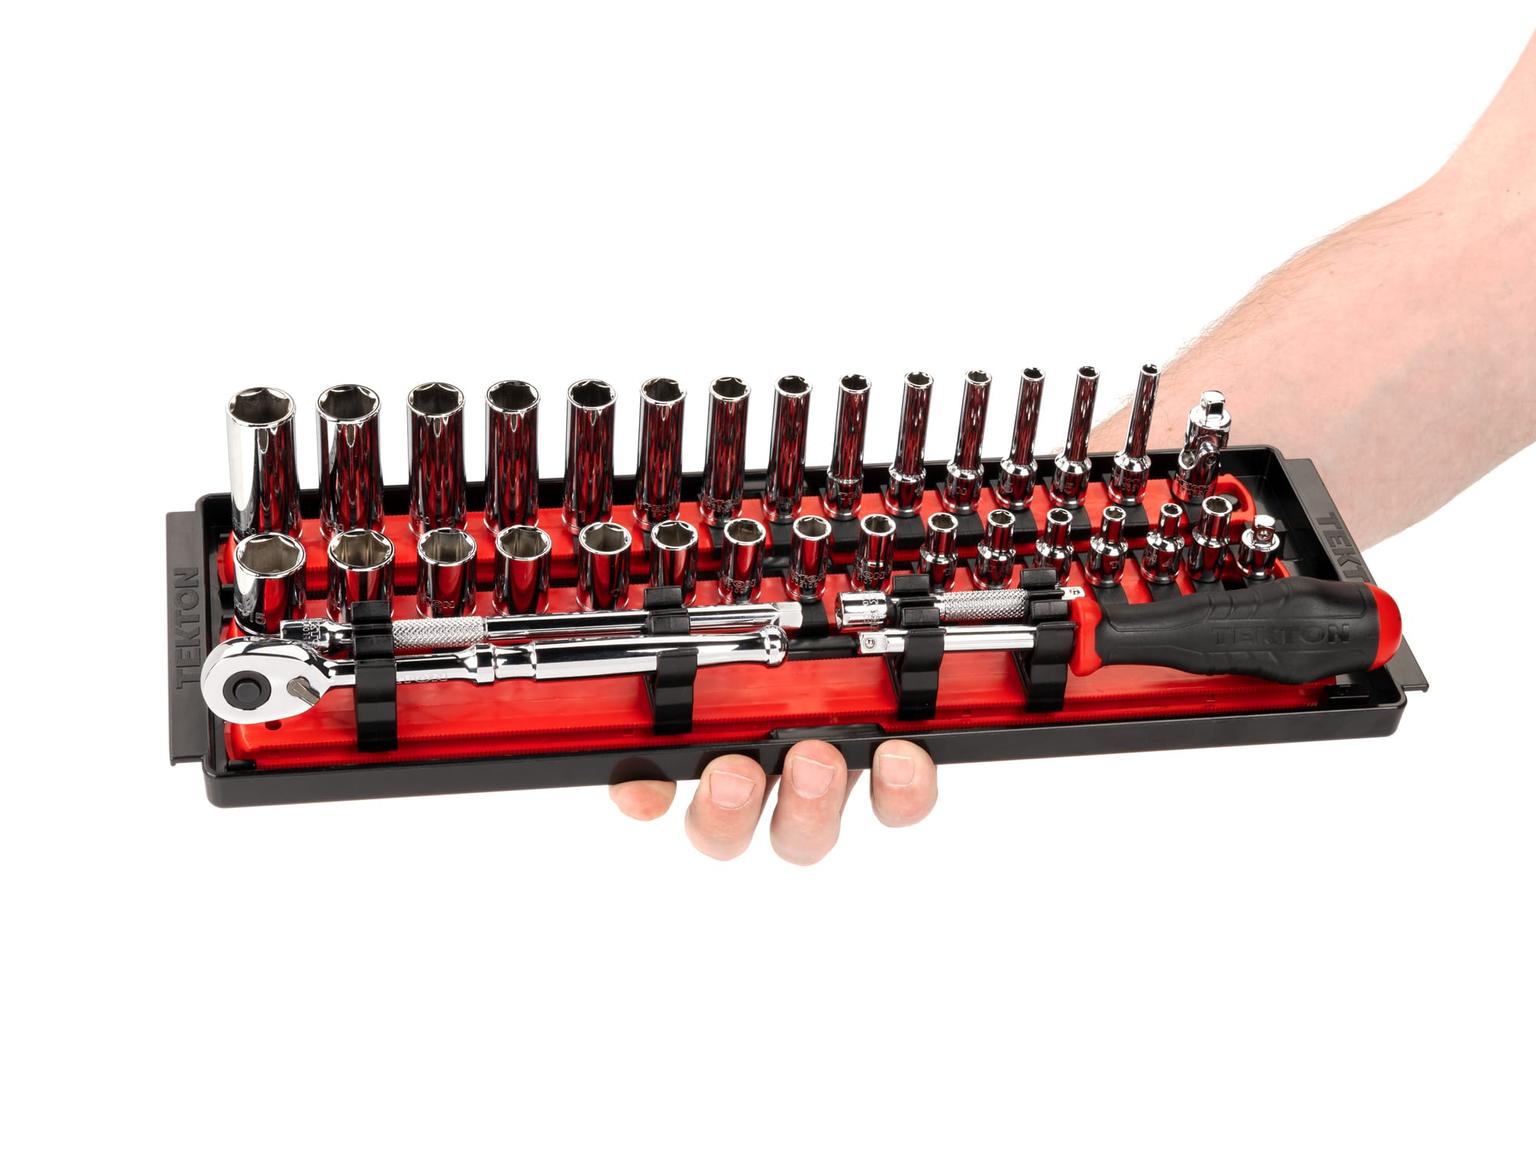 TEKTON SKT03201-T 1/4 Inch Drive 6-Point Socket and Ratchet Set with Rails, 35-Piece (4-15 mm)